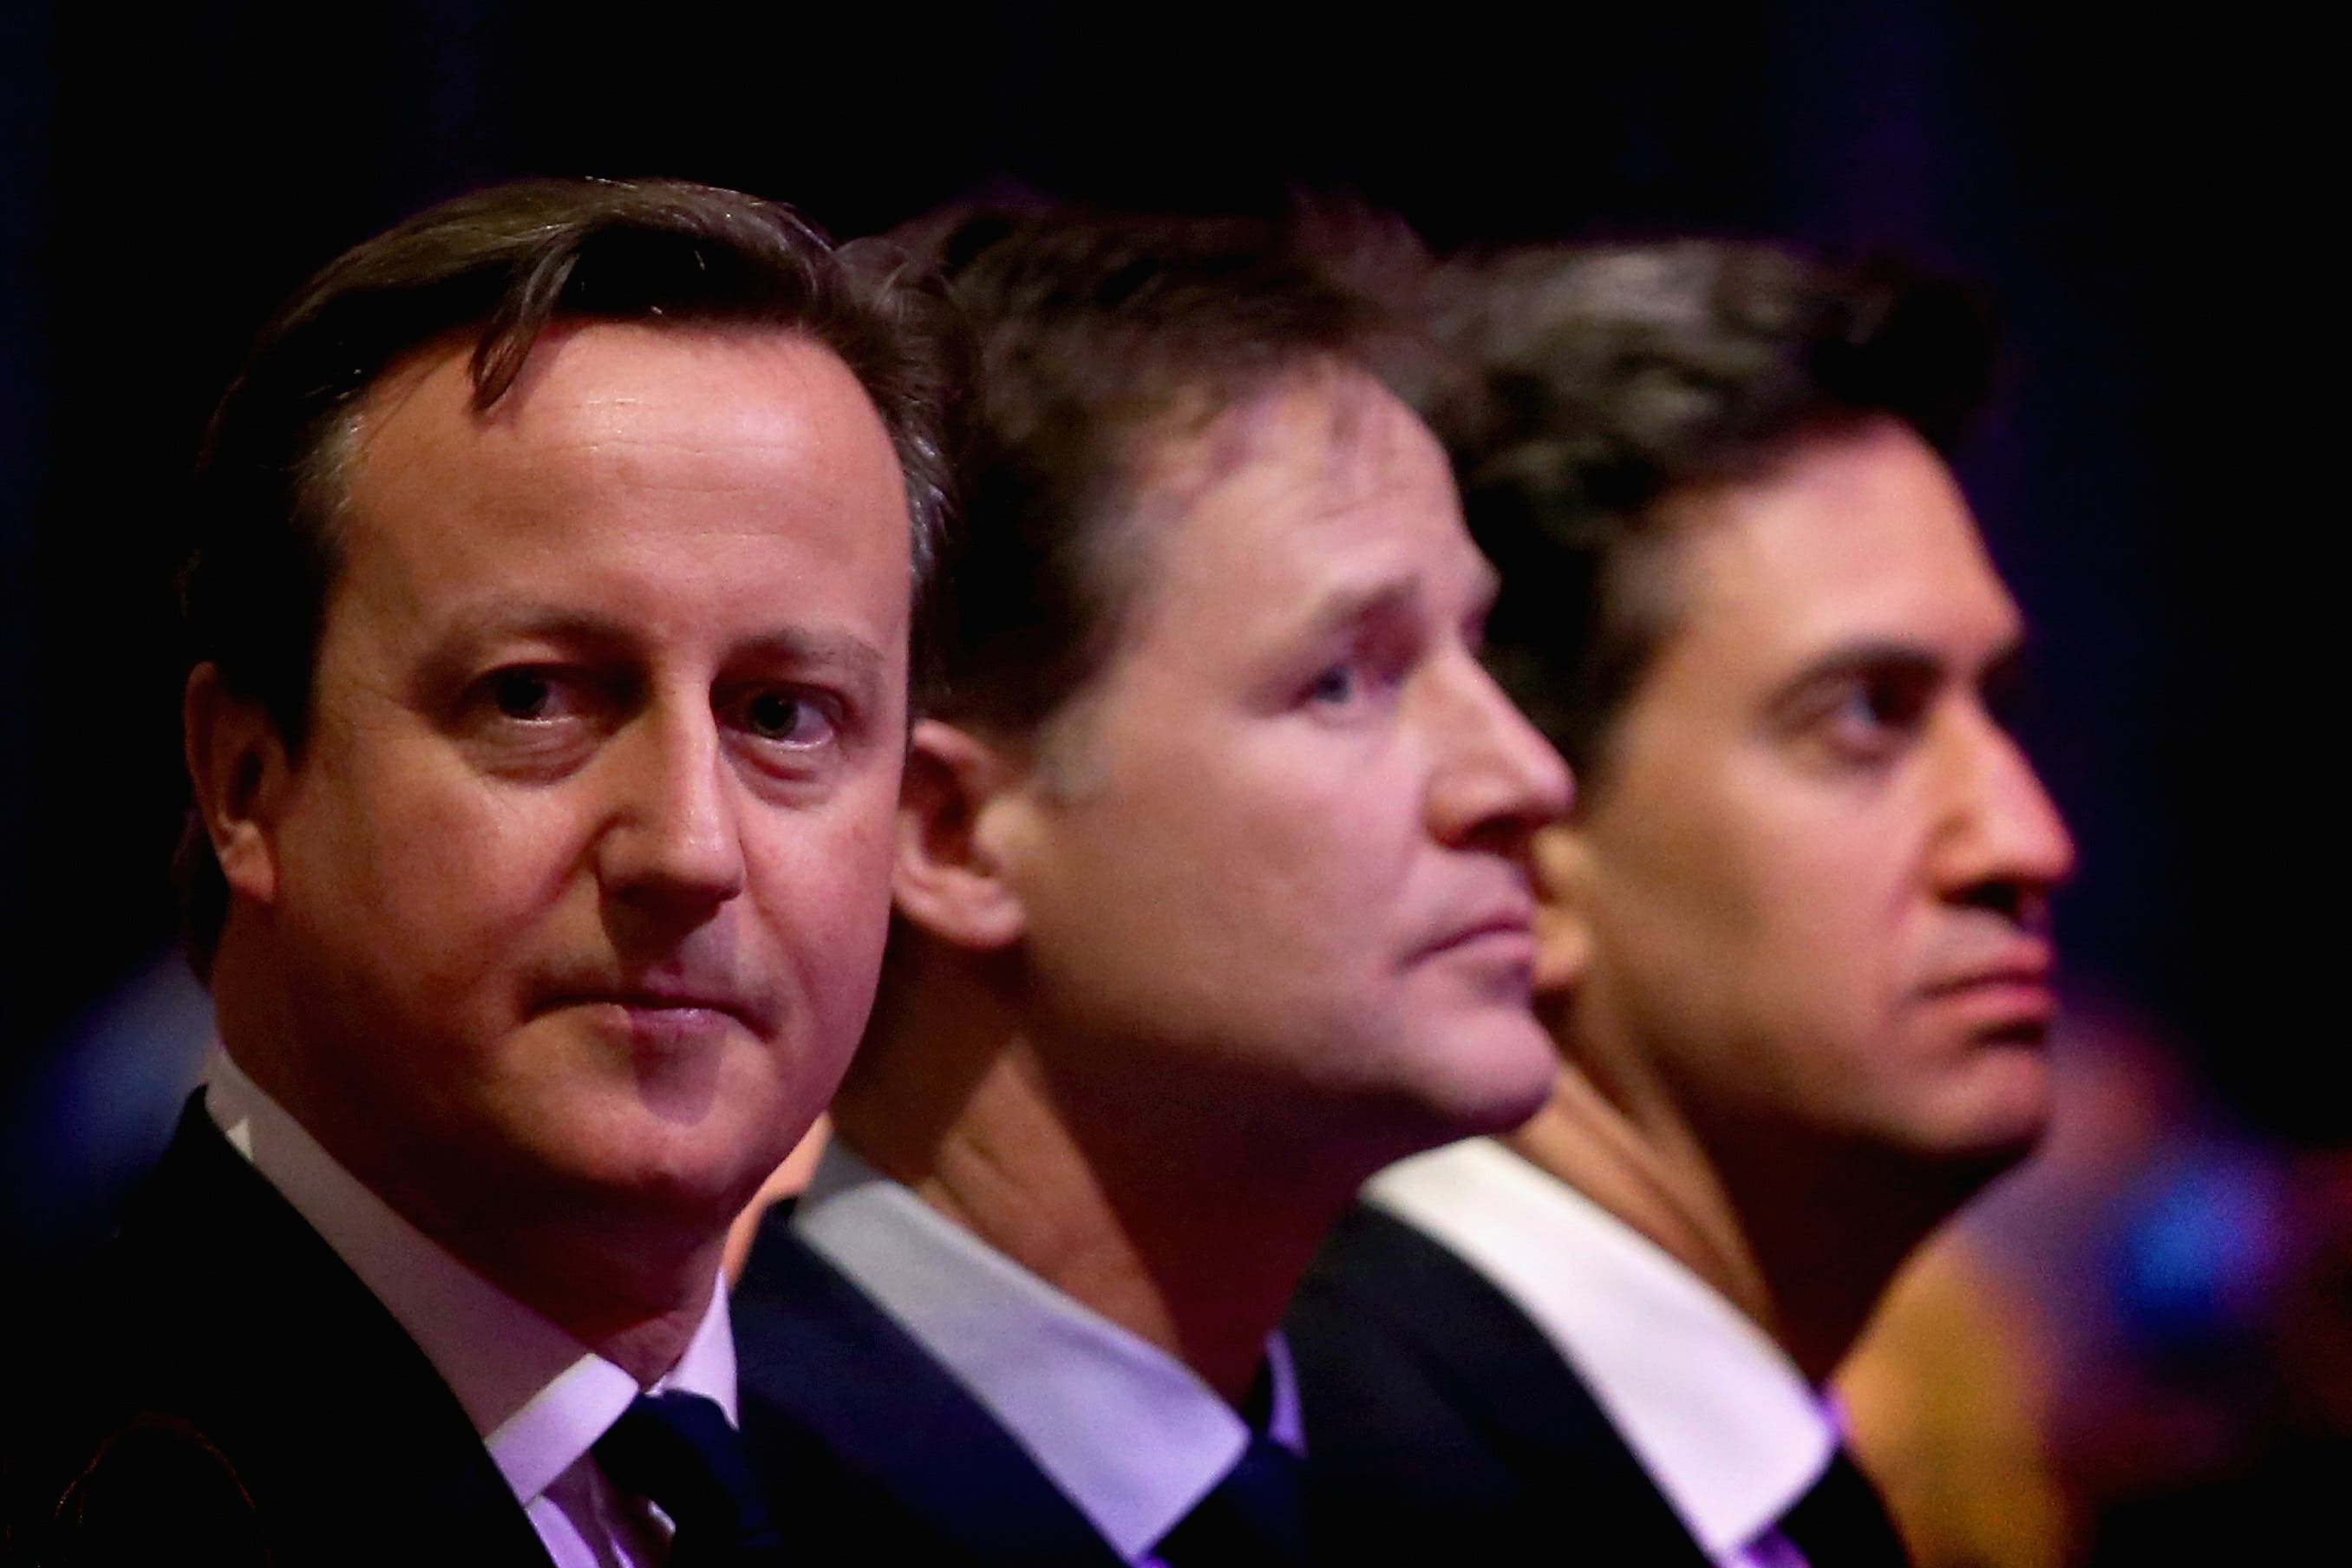 The 2015 election was fought between Conservative David Cameron, Liberal Democrat Nick Clegg and Labour’s Ed Miliband (Chris Jackson/PA)